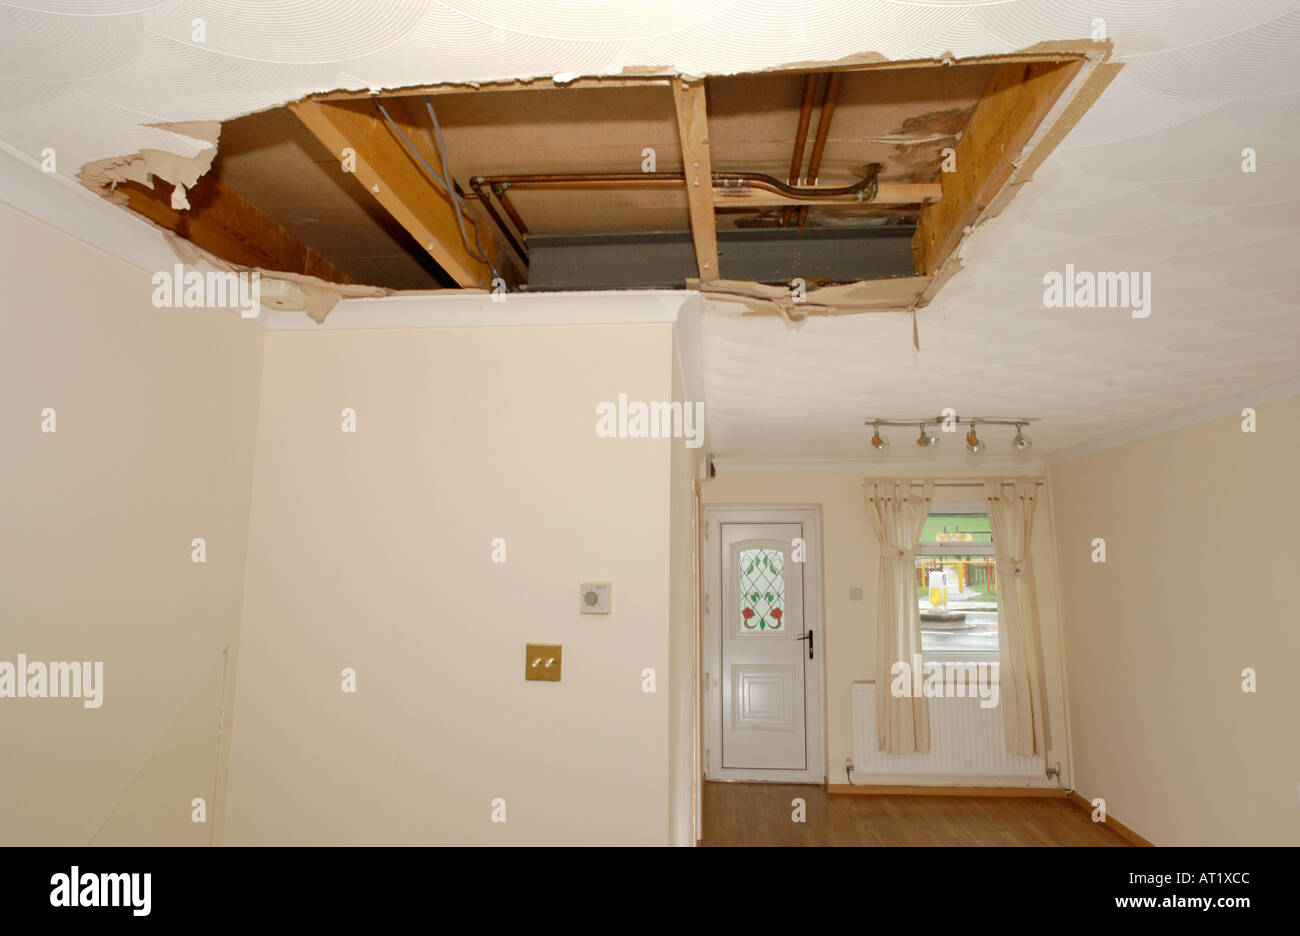 Ceiling In A Modern British House Damaged By A Leaking Water